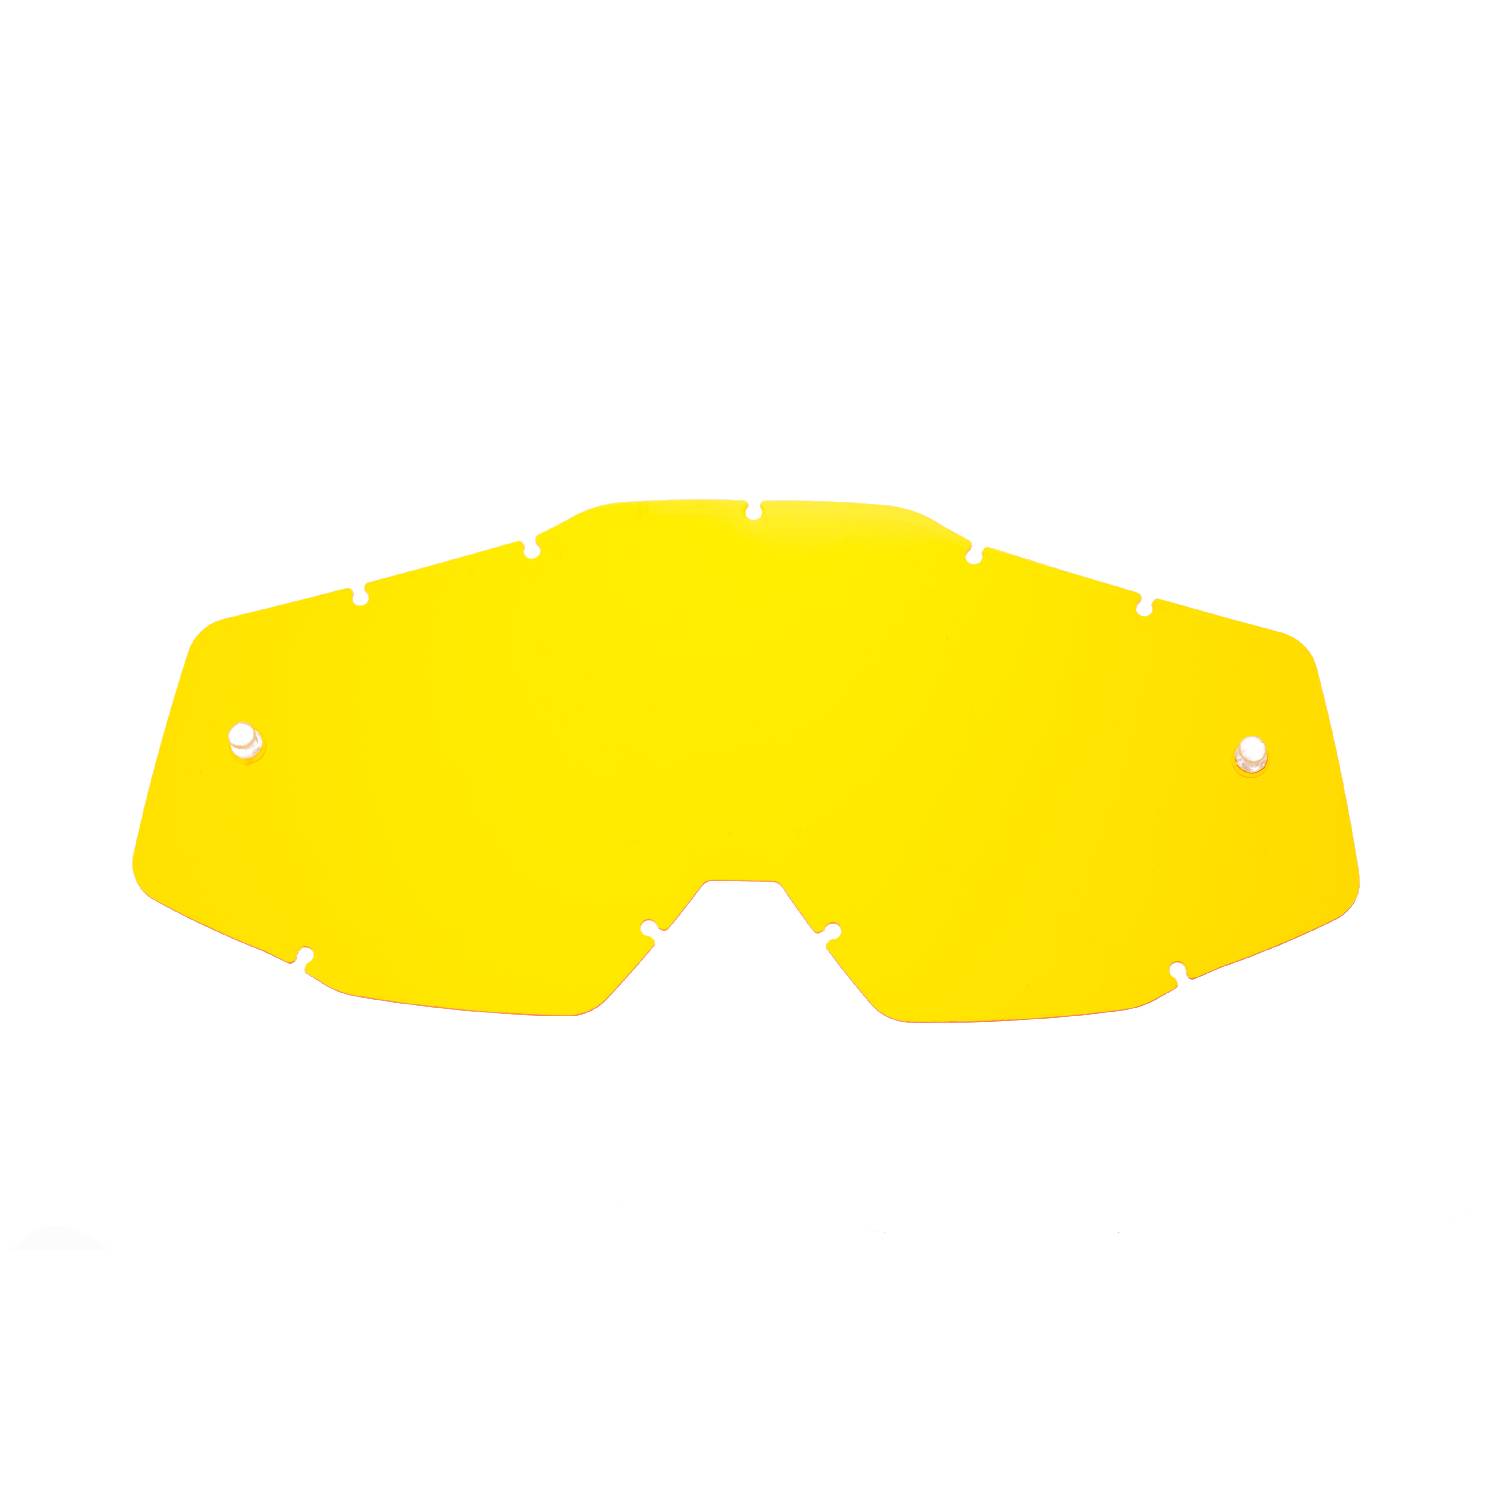 yellow replacement lenses for goggles compatible for 100% Racecraft / Strata / Accuri / Mercury goggle